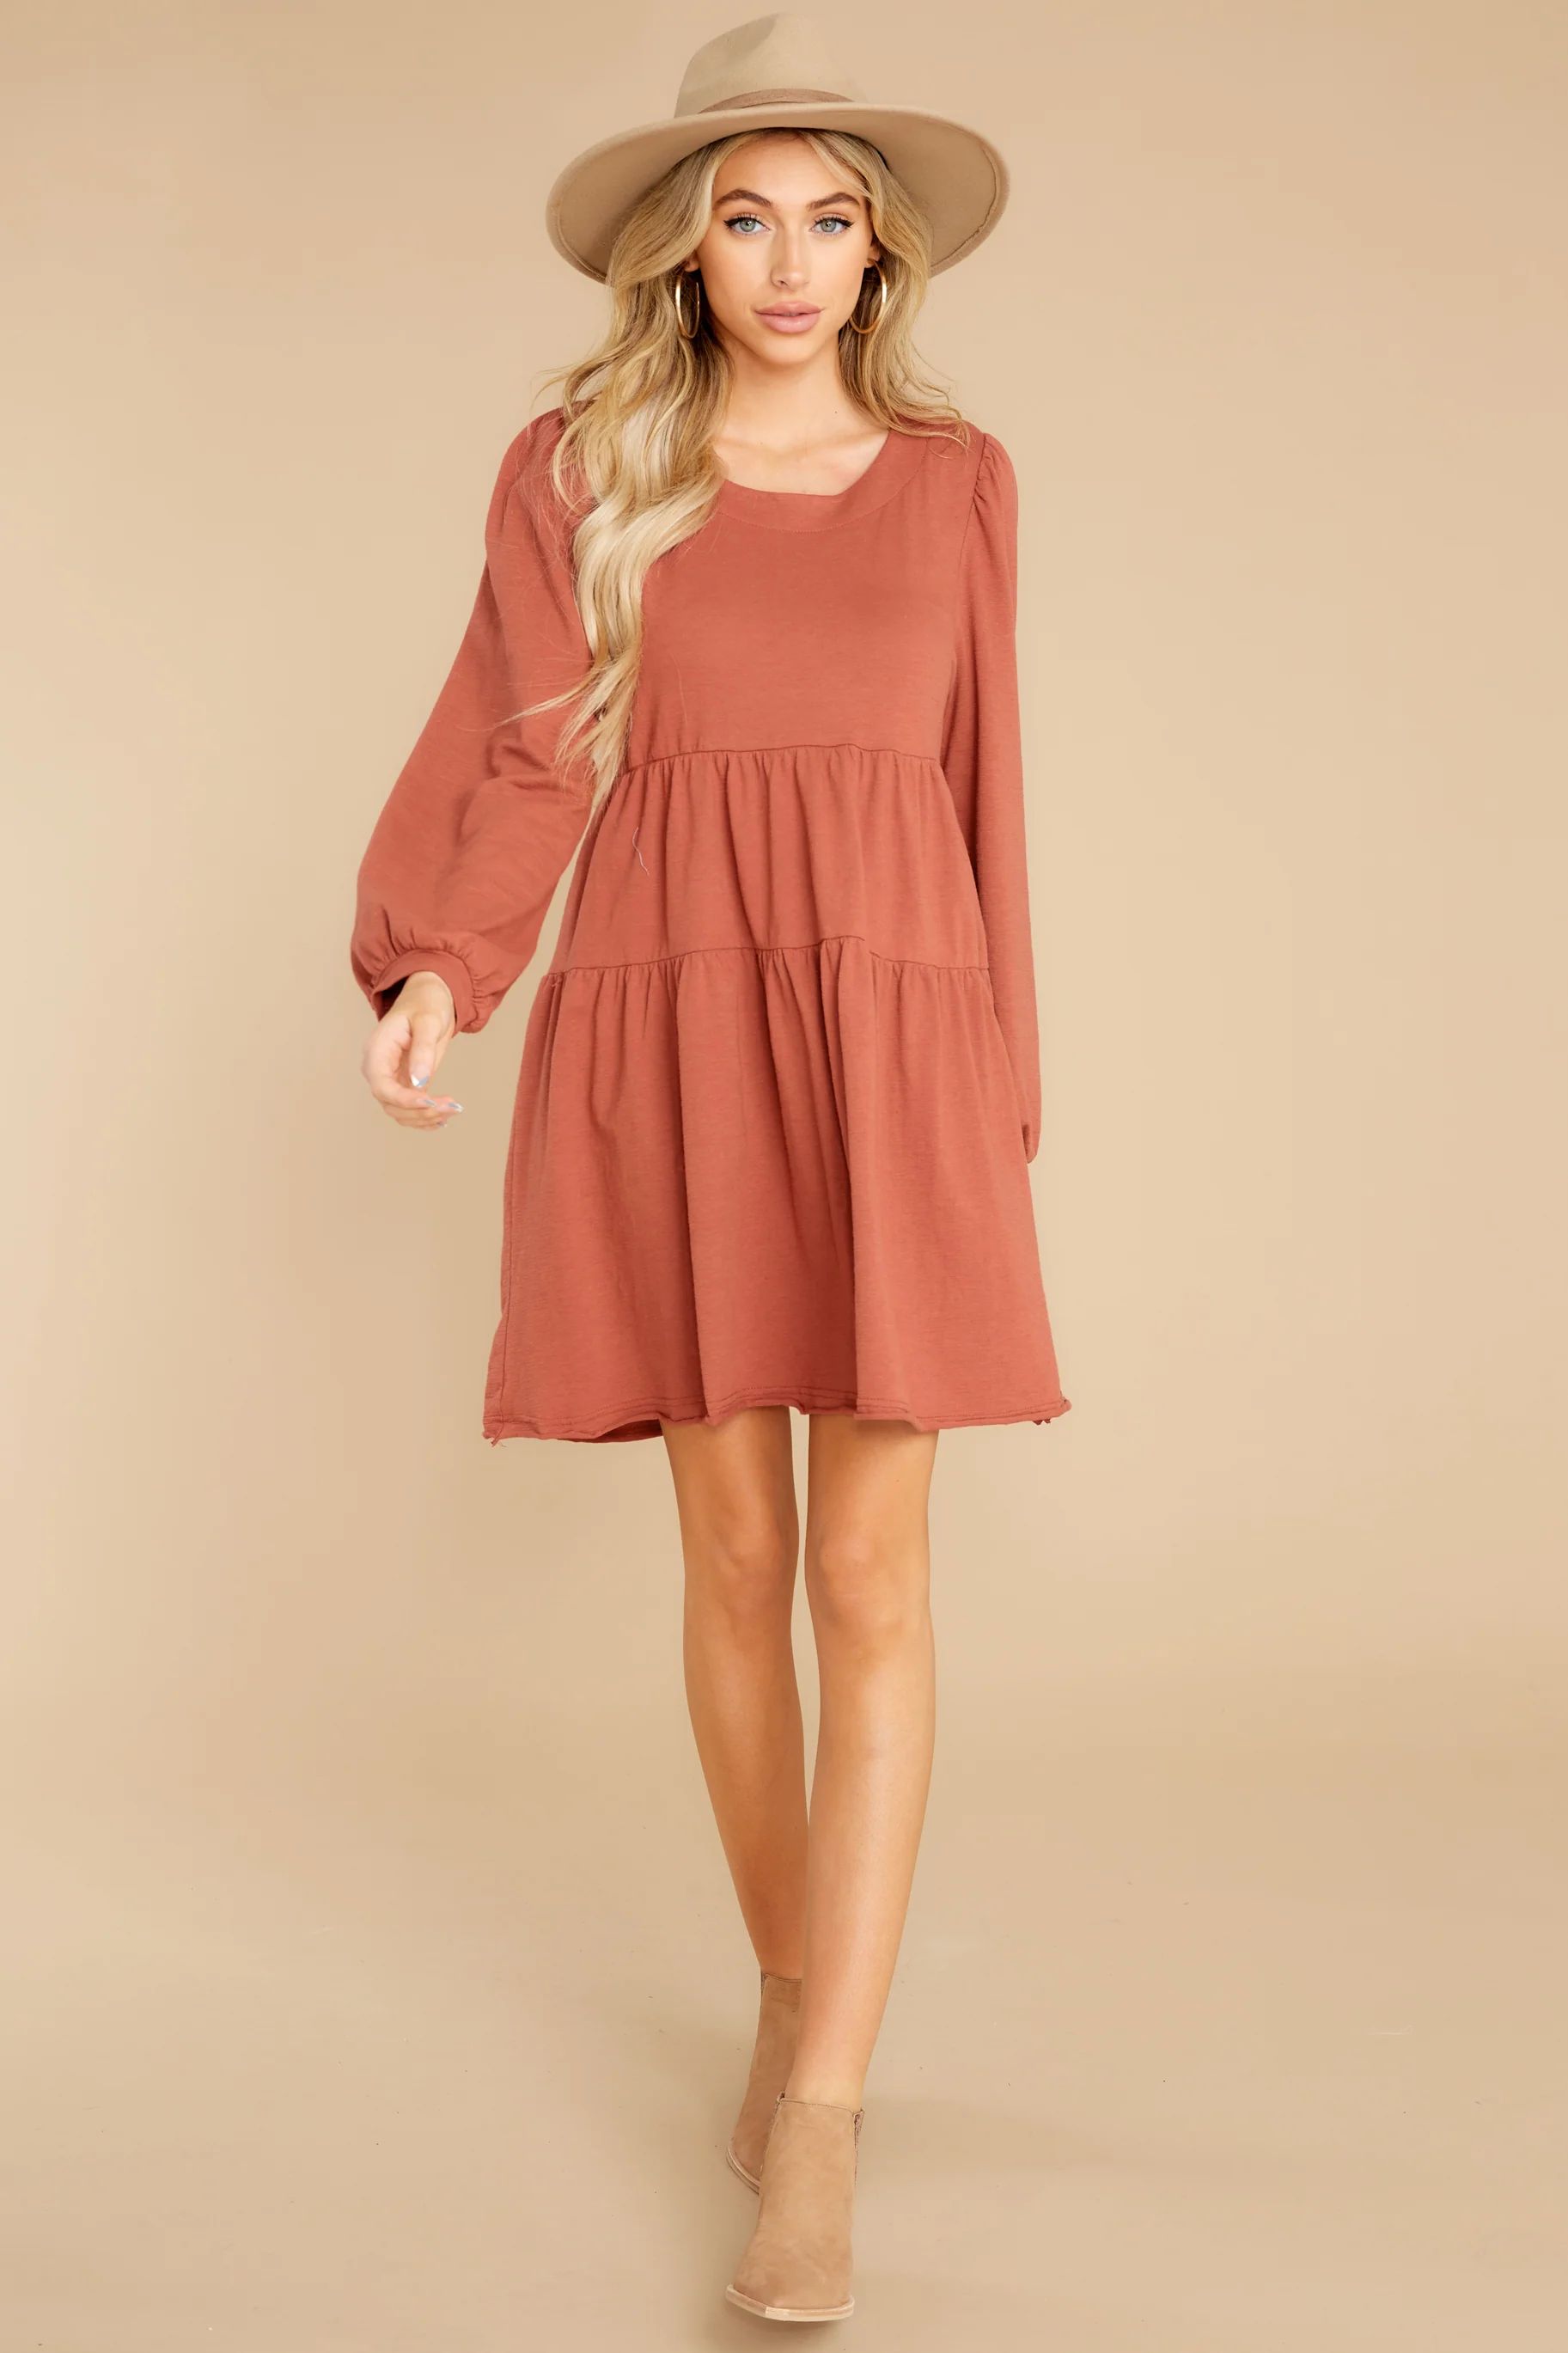 Lovely Day Clay Dress | Red Dress 